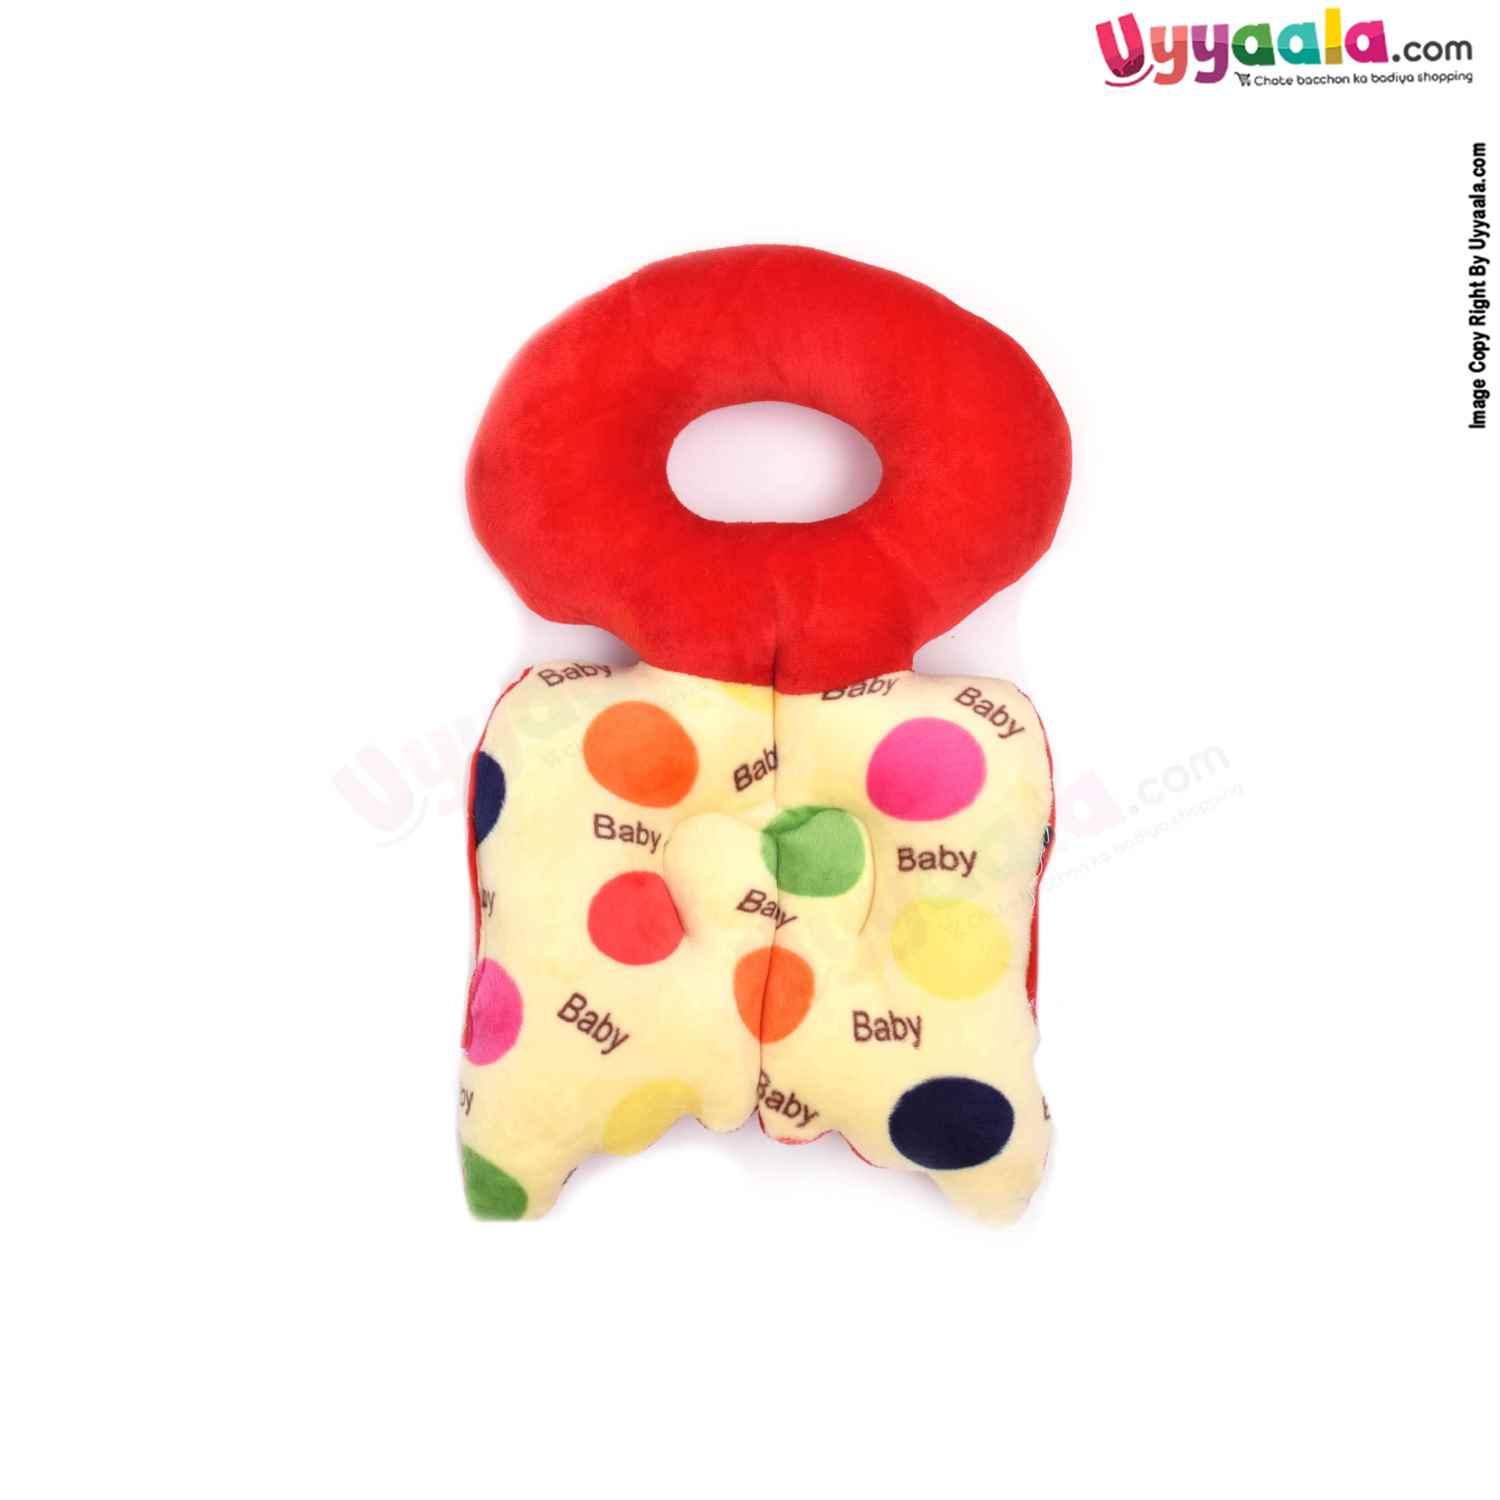 Baby Head Protector with Pillow with Adjustable Straps & Velvet Material, with Print 4-18m Age, Size(32*20cm)